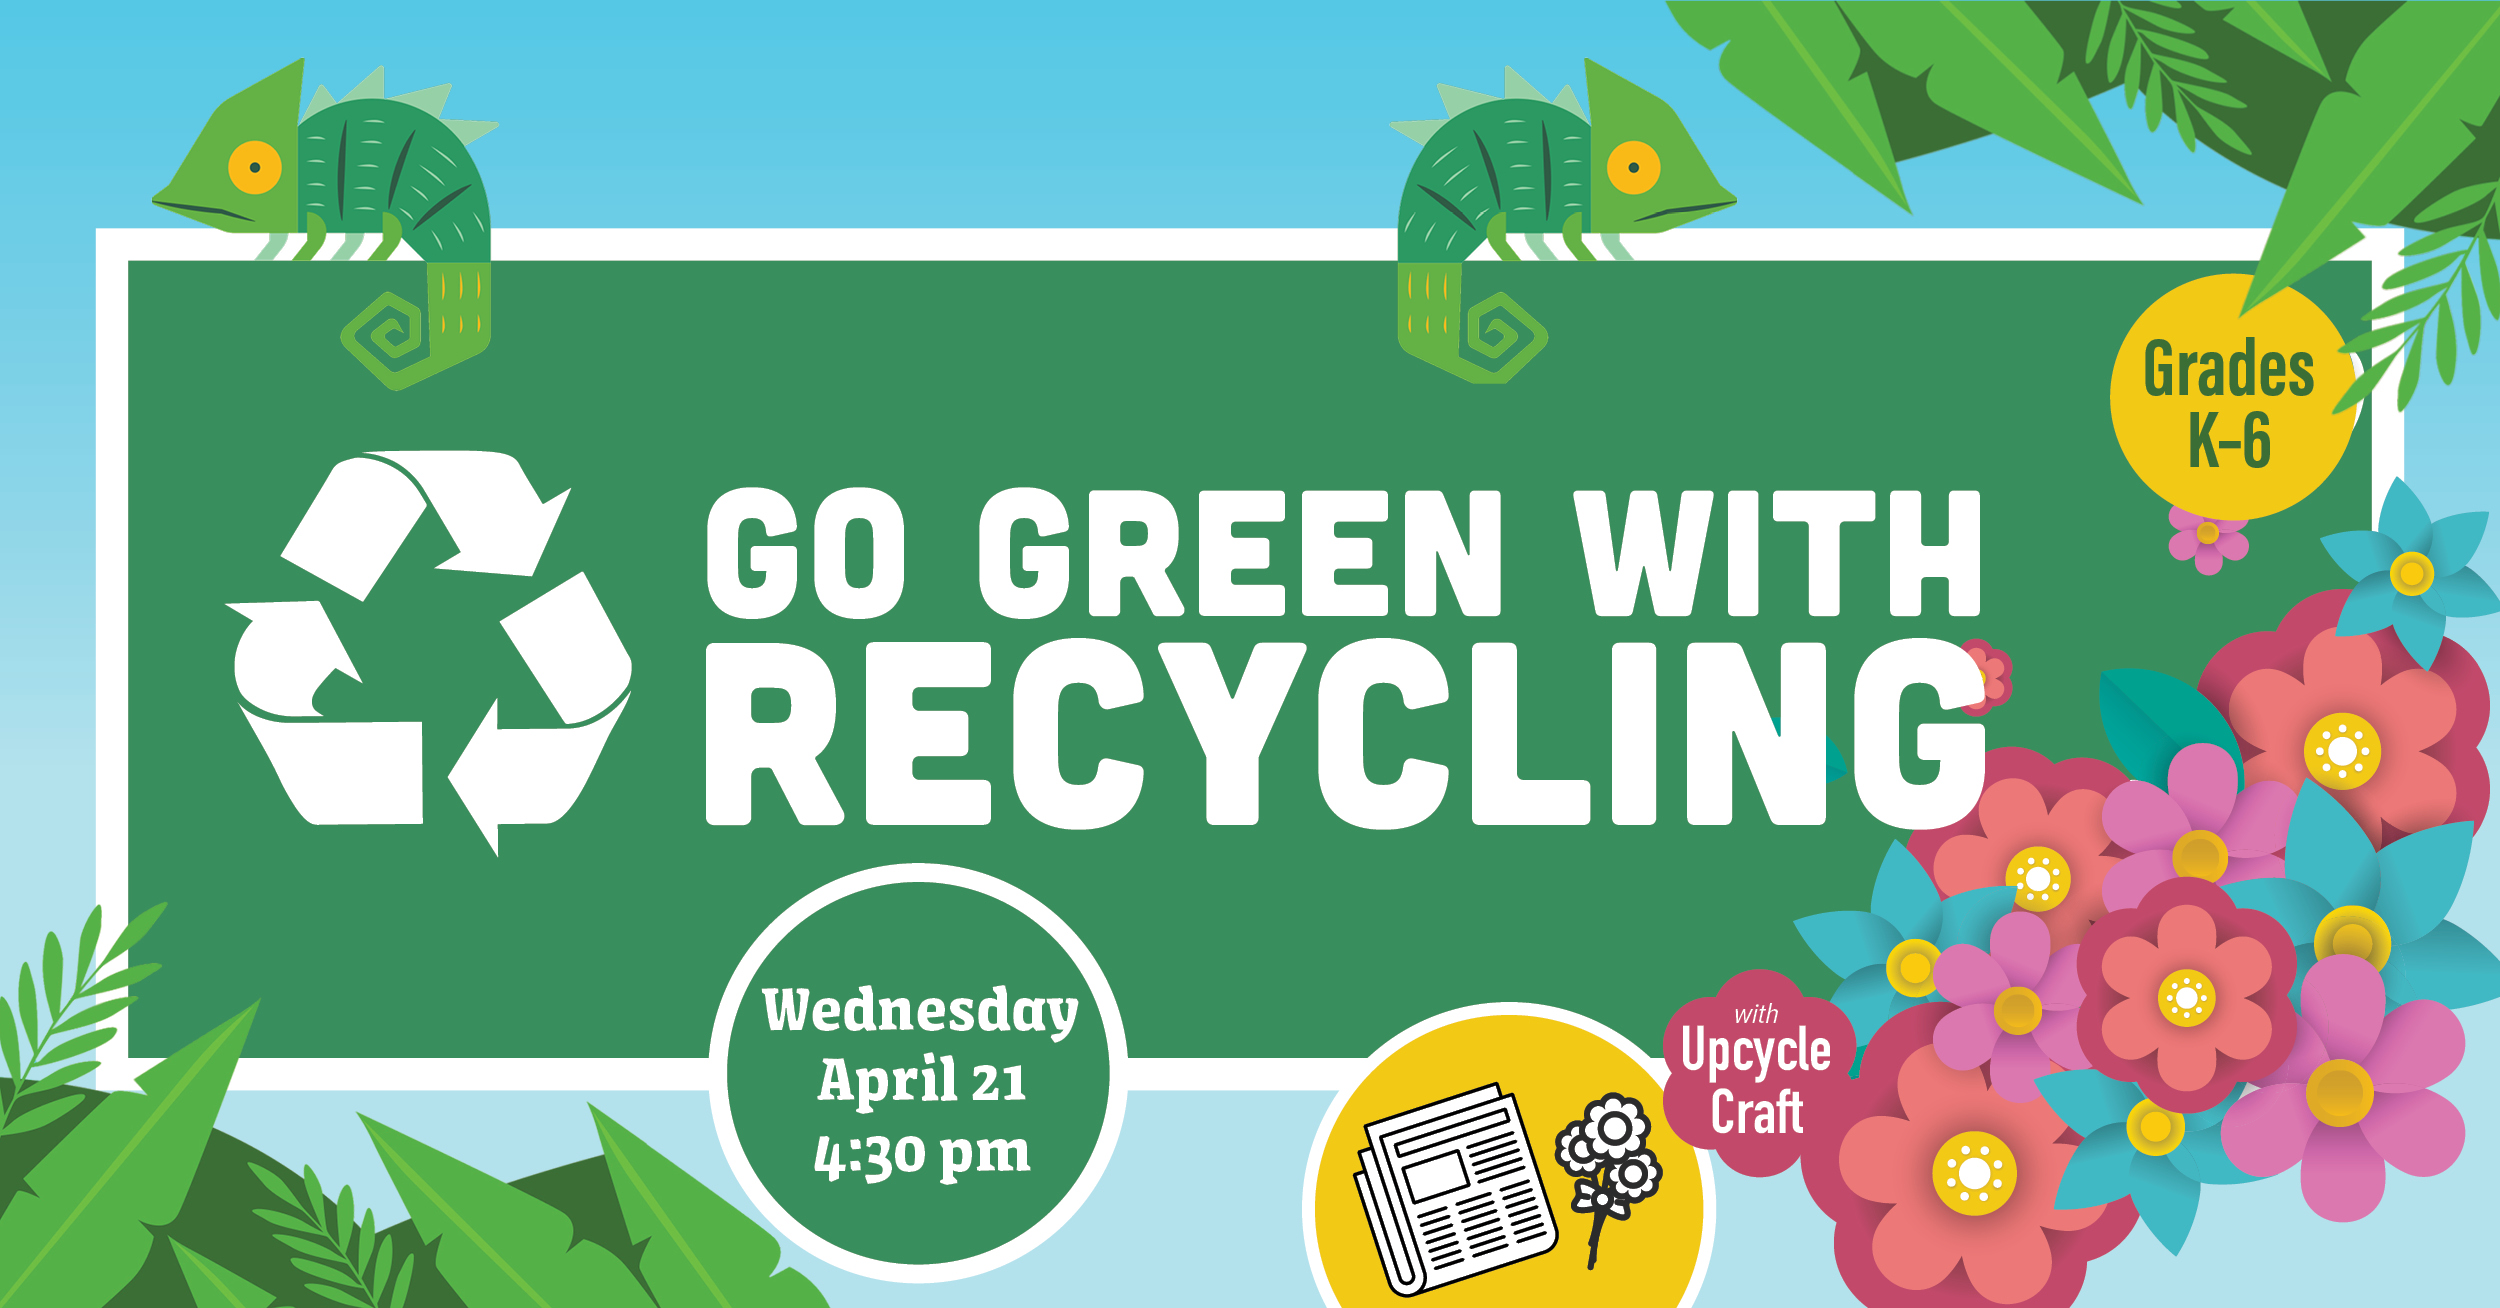 Go Green With Recycling. Wednesday April 21 at 4:30pm. Kindergarten to second grade. With upcycle craft. 